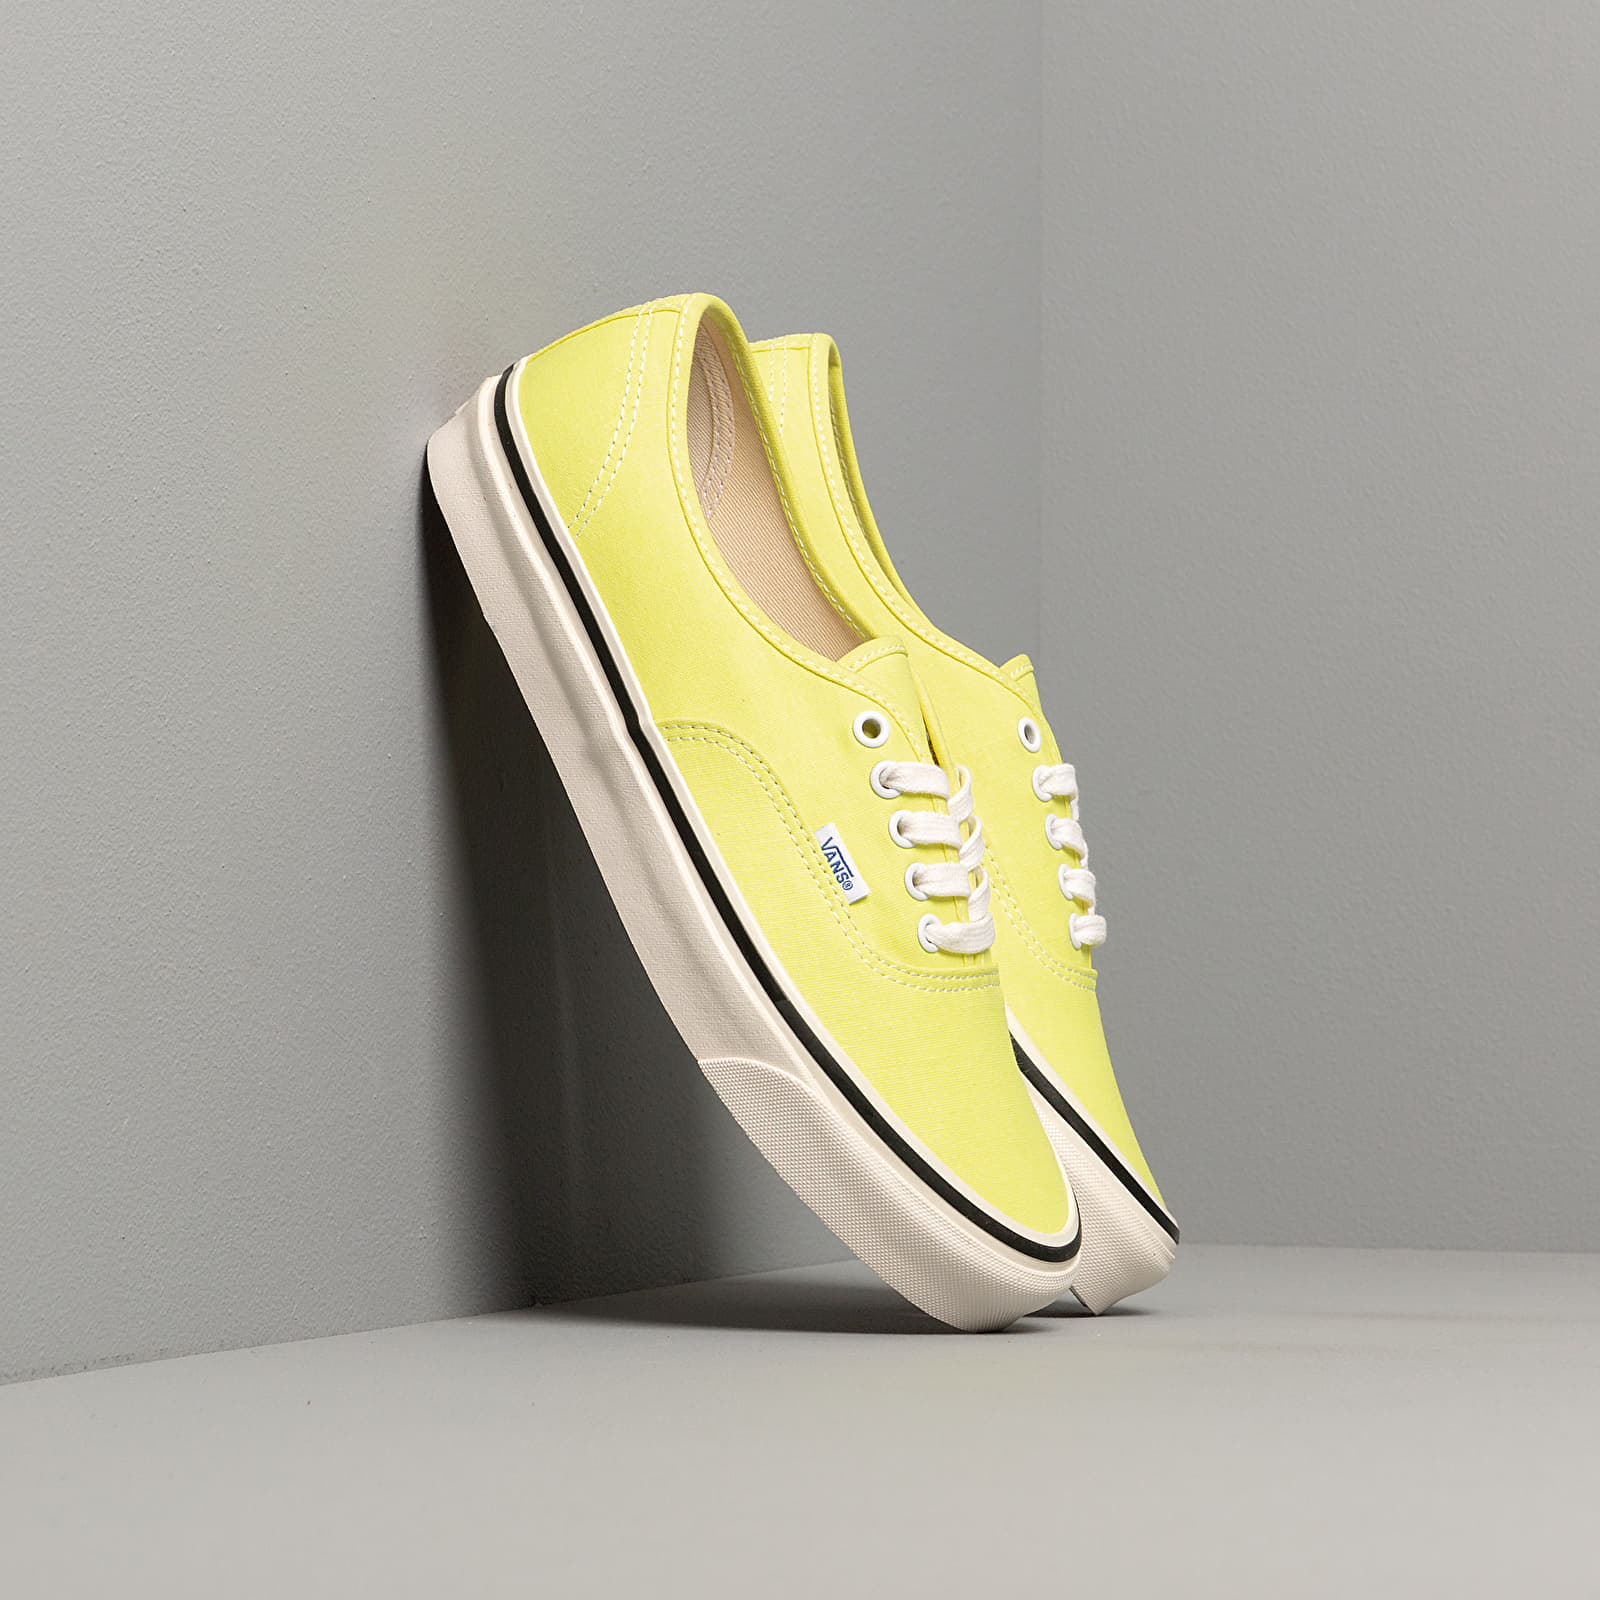 Street shoes Vans Authentic 44 Dx (Anaheim Factory) Yellow